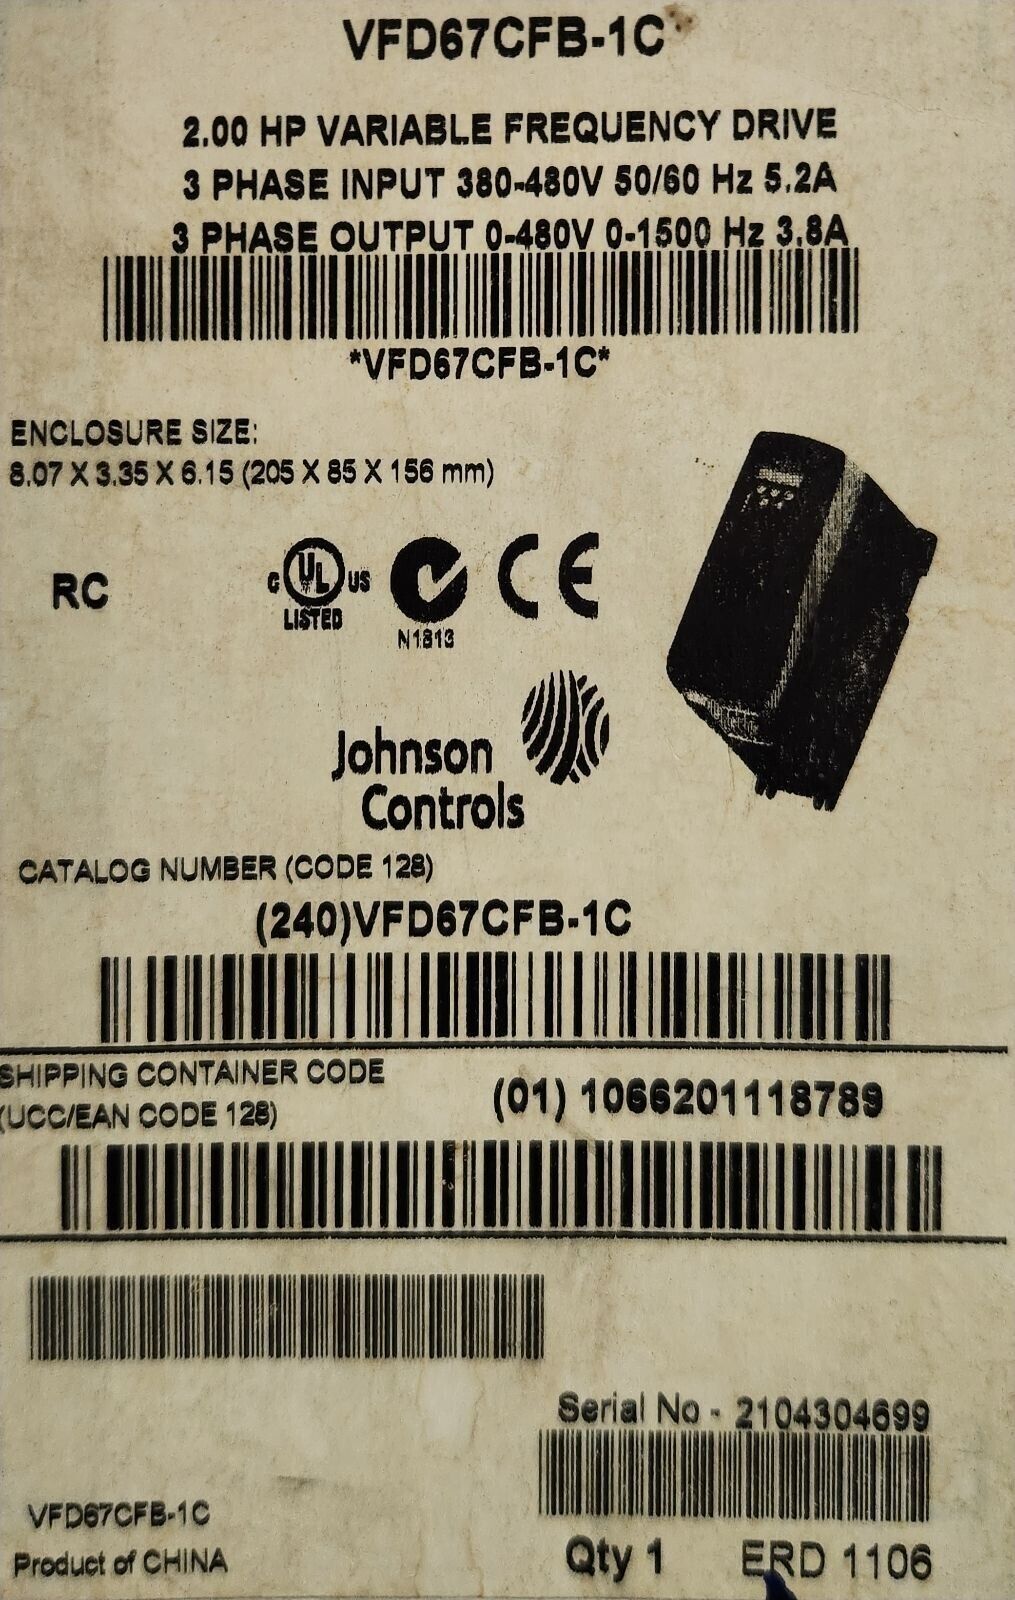 Johnson Control 2HP Variable Frequency Drive: 3 Phase Input 380-480V 50/60Hz 5.2A - VFD67CFB-1C